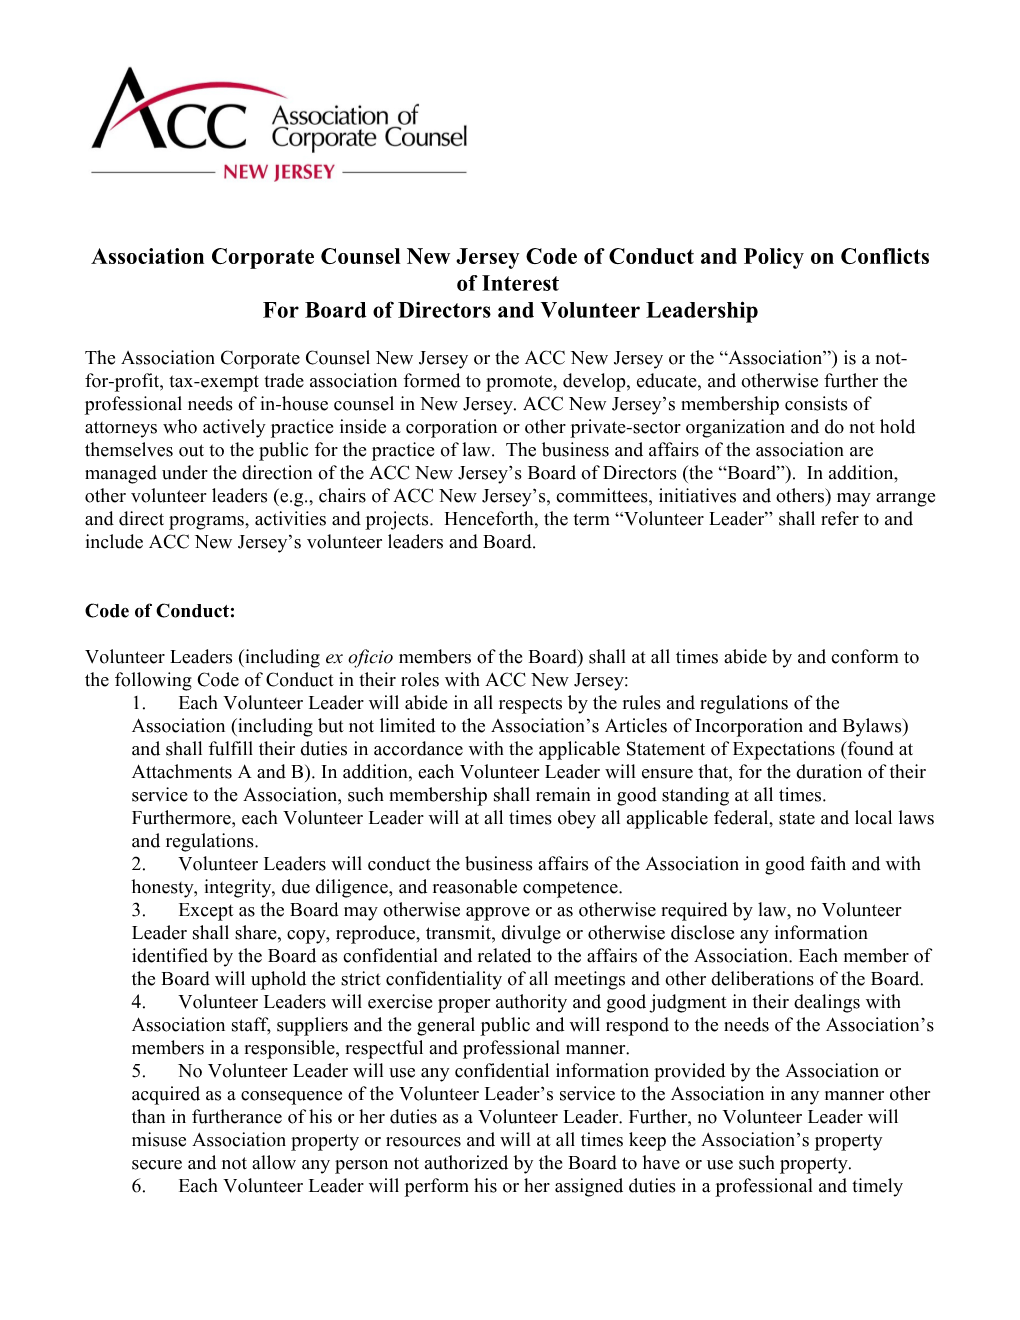 Association Corporate Counsel New Jersey Code of Conduct and Policy on Conflicts of Interest